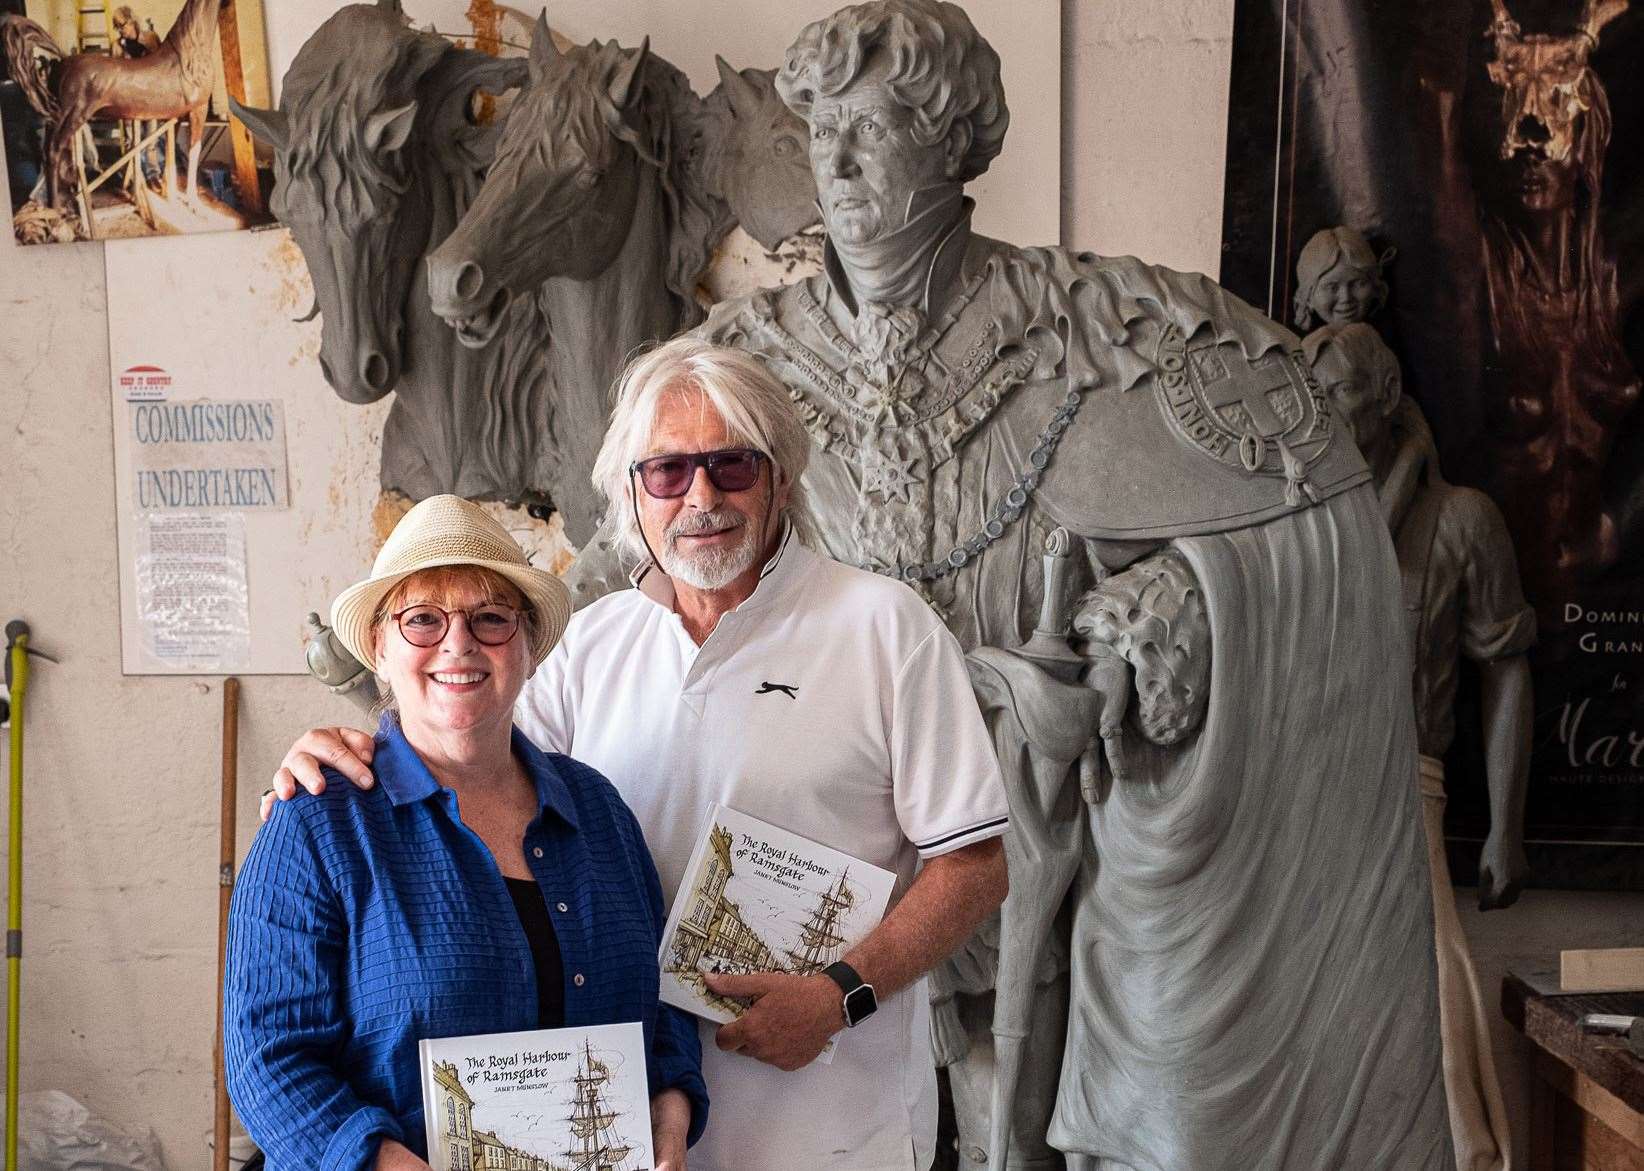 Actress Brenda Blethyn is supporting the appeal and has donated towards the completion of a statue to mark the 200th anniversary of the naming of the town as a Royal Harbour. She is pictured with the statue's creator Dominic Grant. Picture: Royal Harbour 200th Anniversary Festival